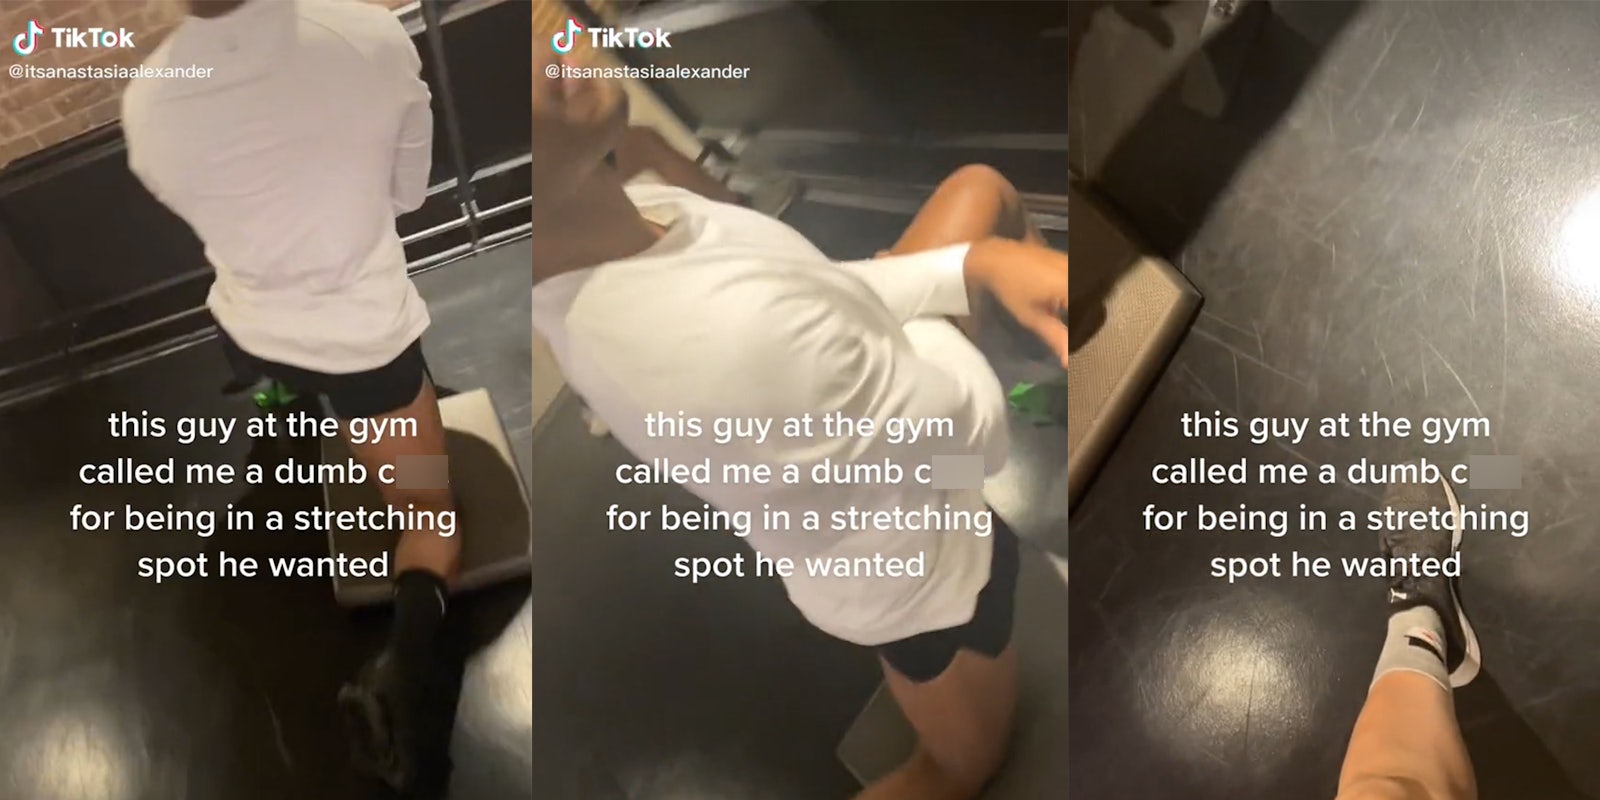 woman confronts man at gym with caption 'this guy at the gym called me a dumb cunt for being in a stretching spot he wanted'